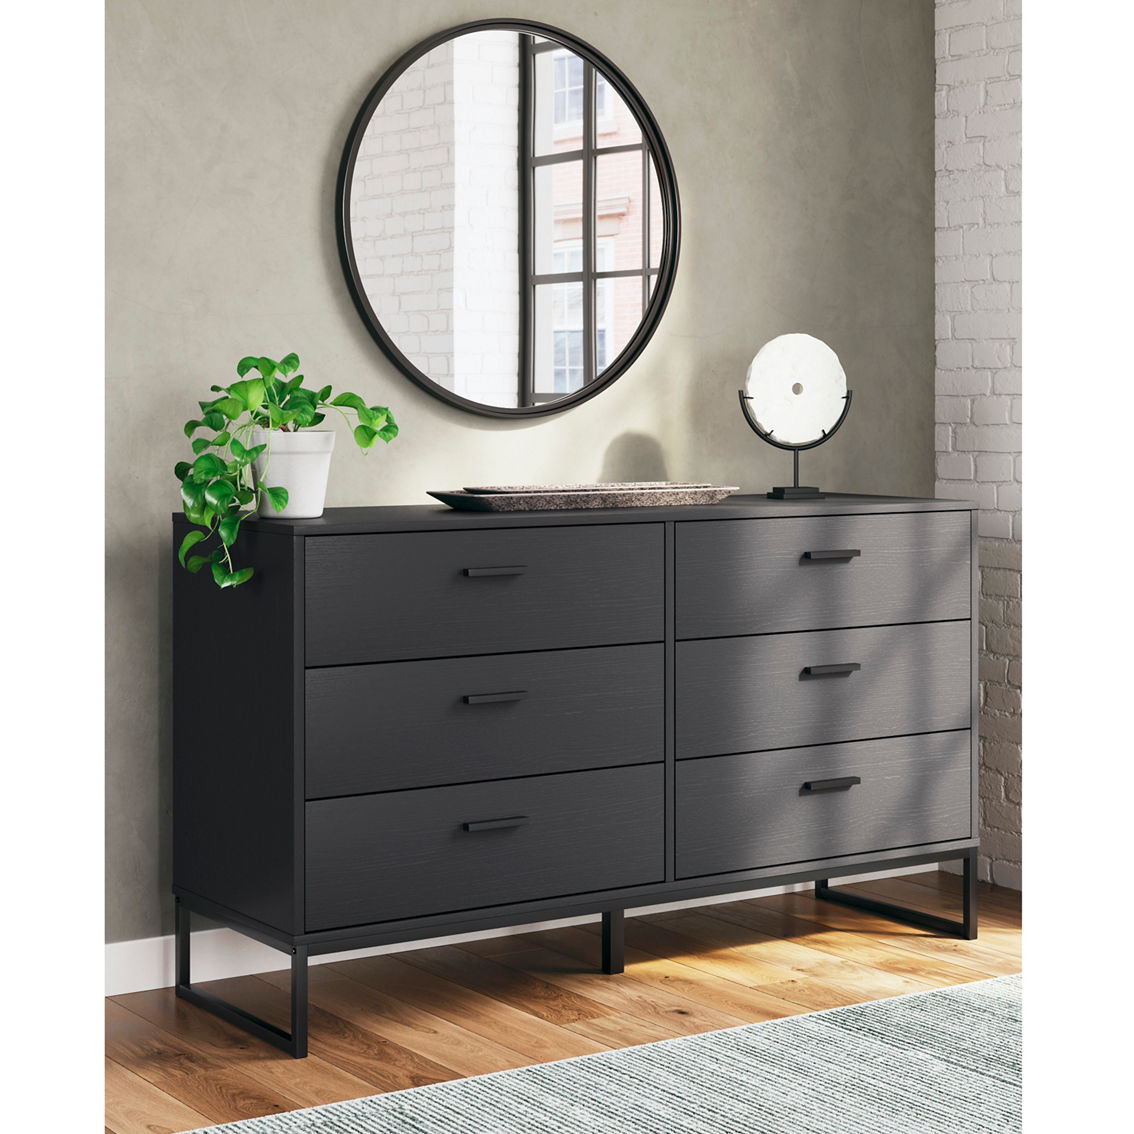 Signature Design by Ashley Socalle Ready-to-Assemble Dresser - Image 6 of 8